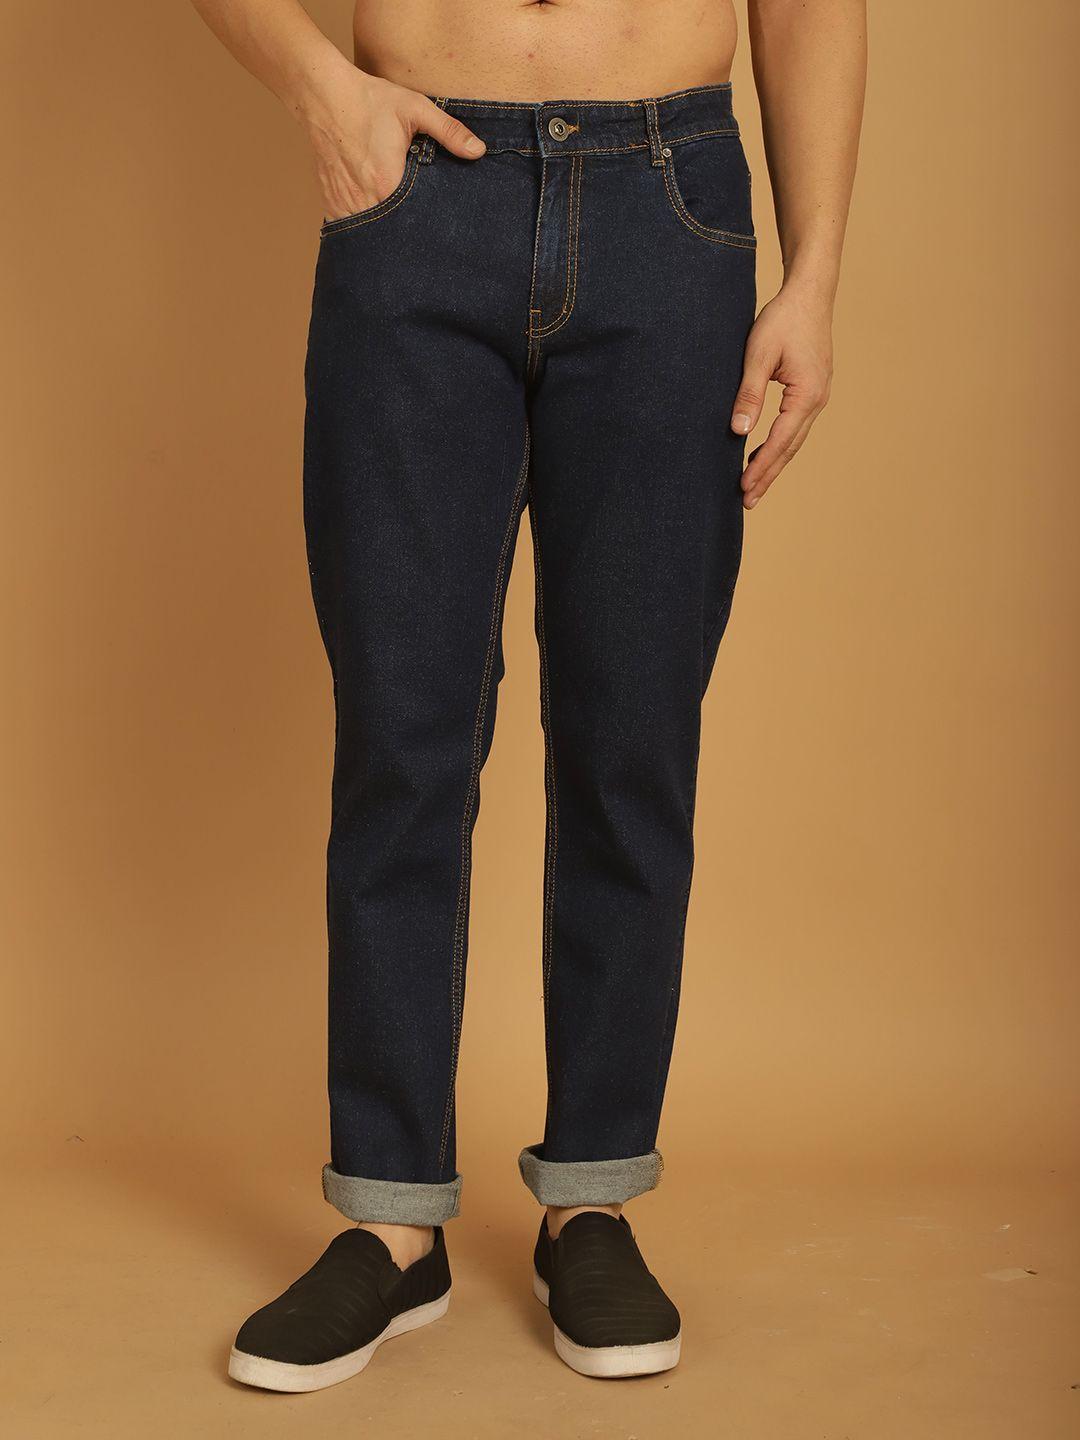 the roadster lifestyle co. men mid-rise jeans